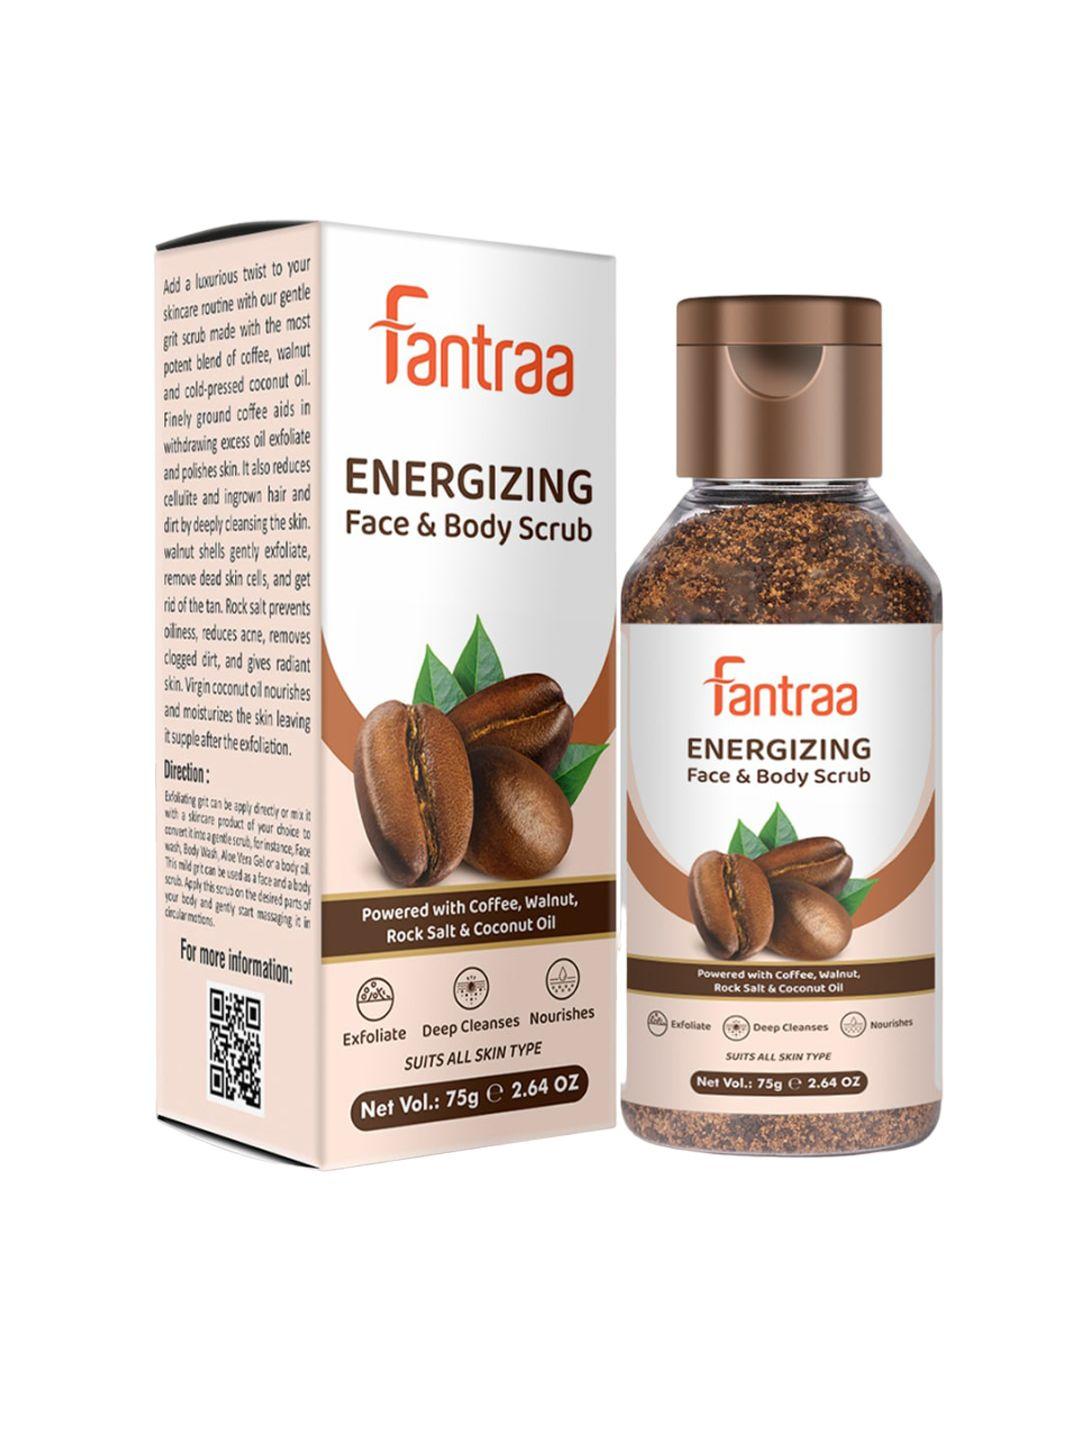 fantraa energizing coffee face & body scrub for tan removal & deep cleanses skin - 75g